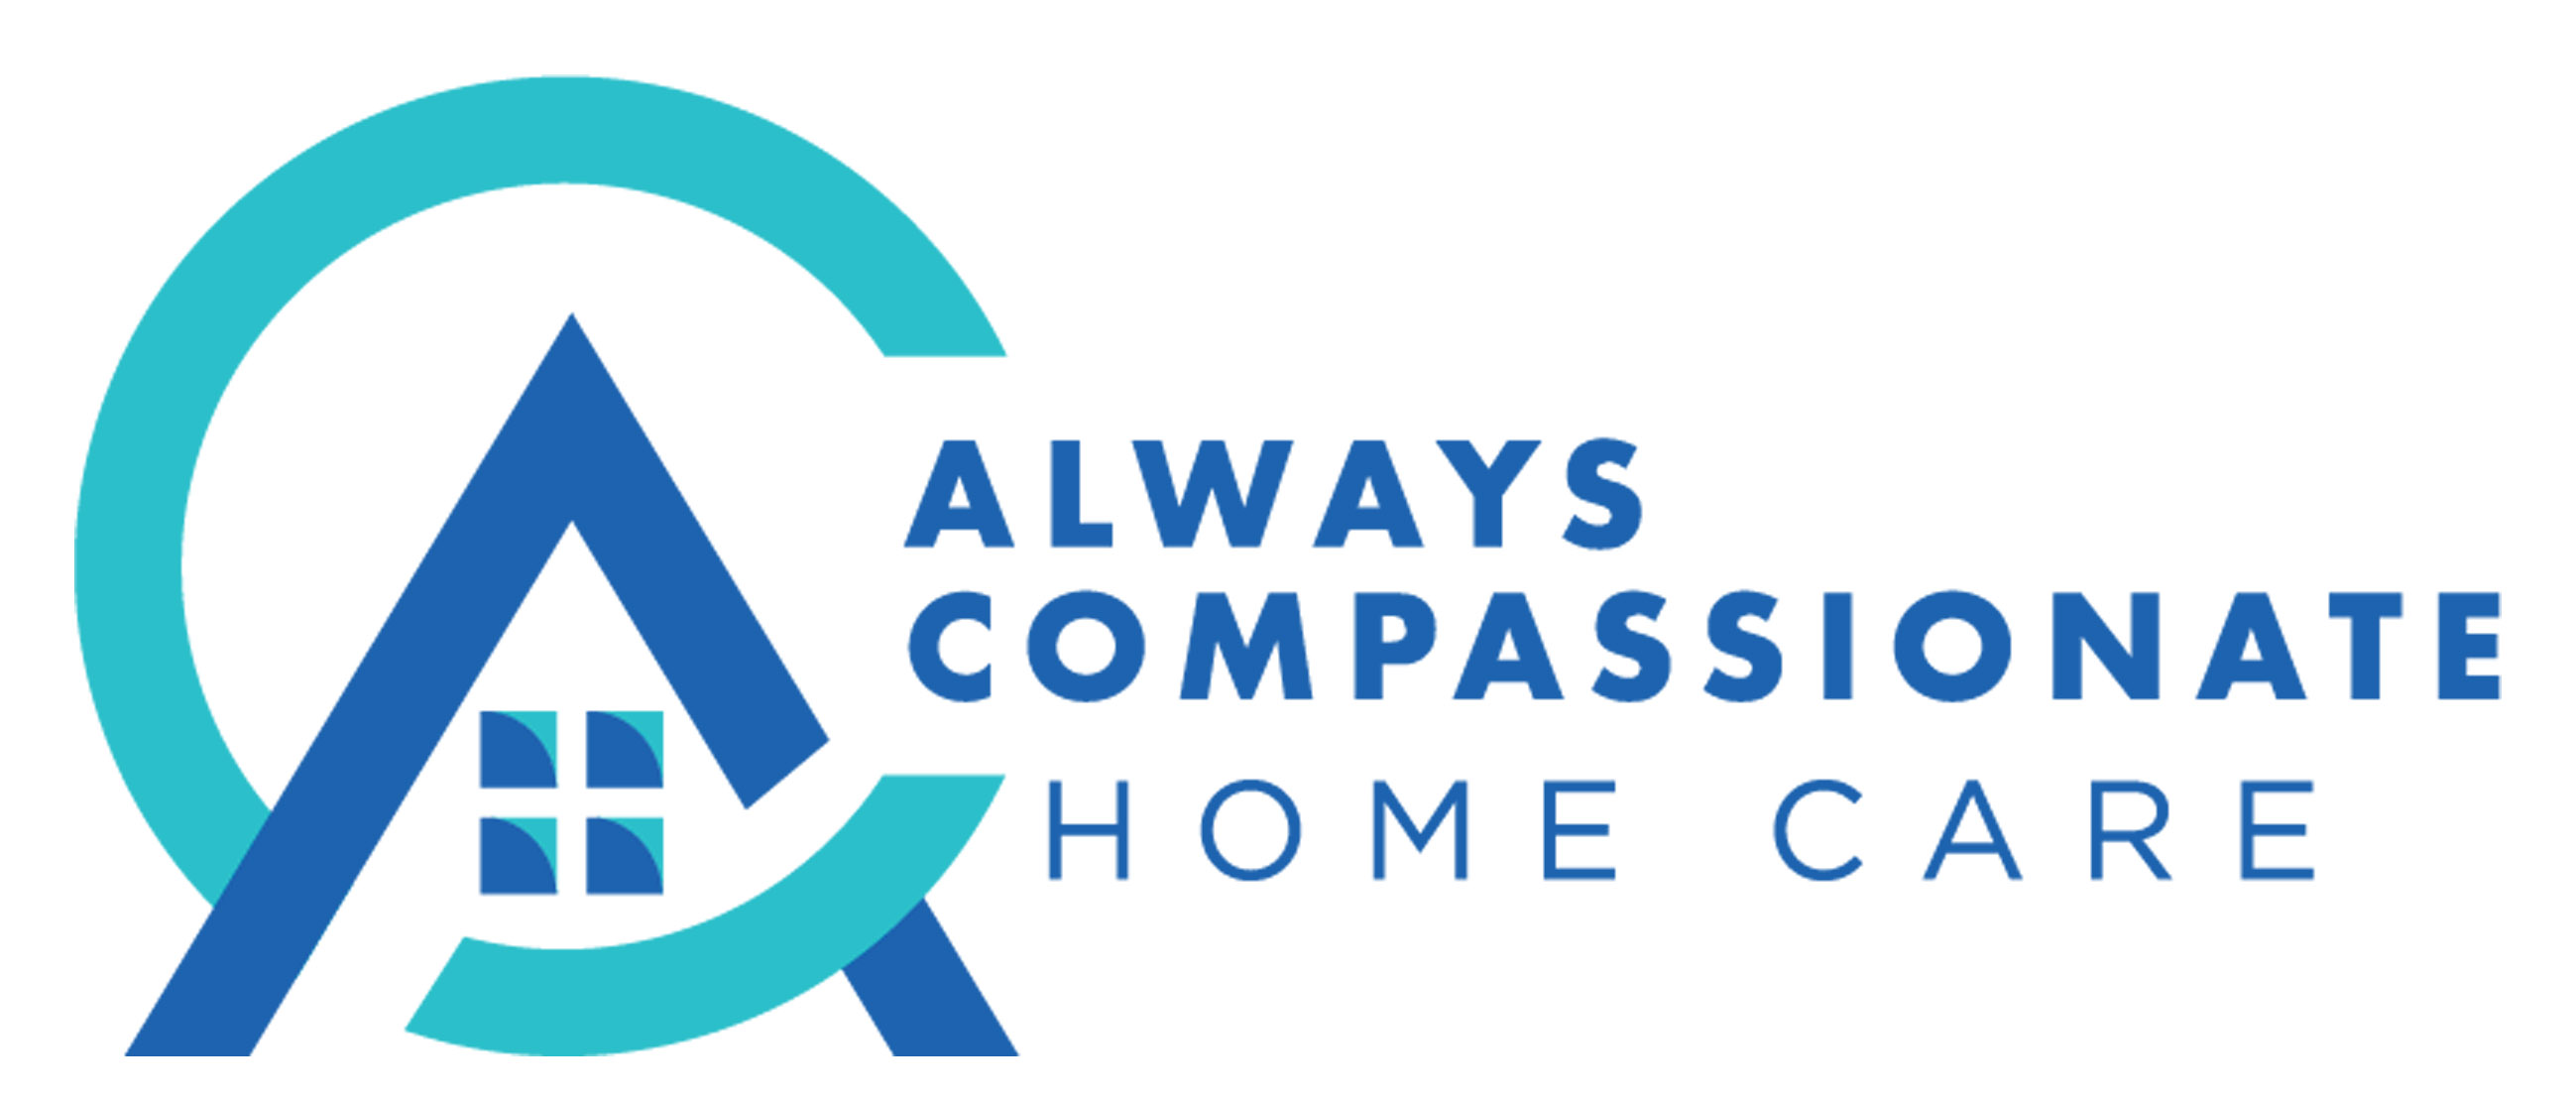 D. Always Compassionate Homecare (Silver)